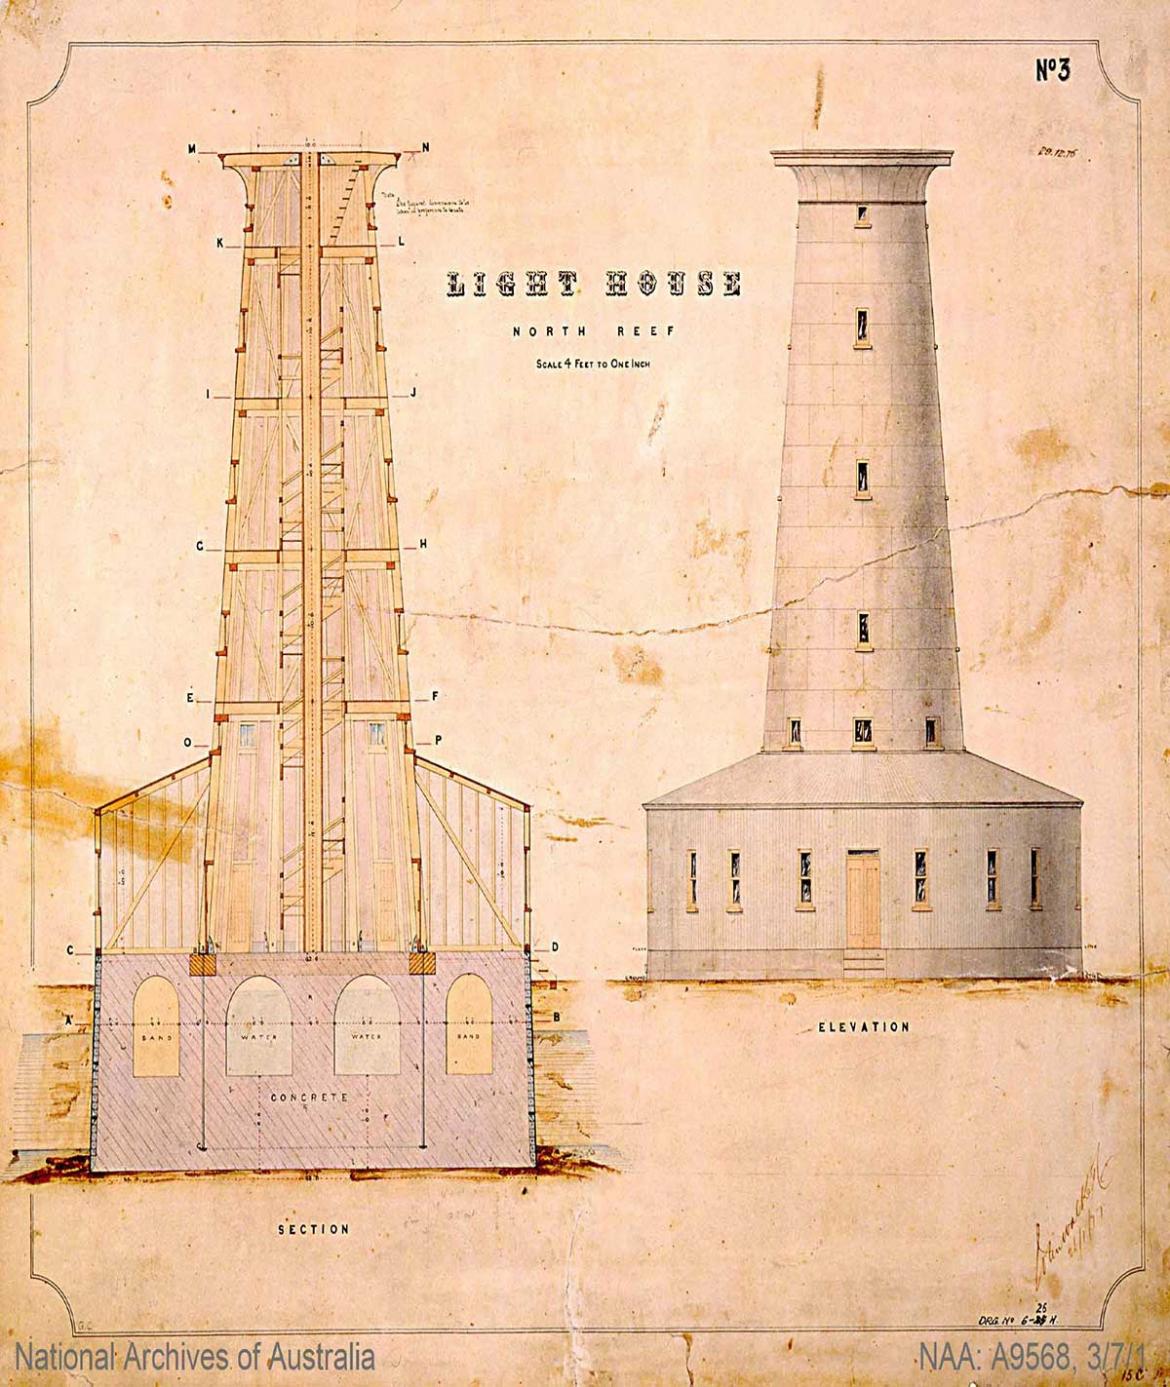 Figure 12. Blueprint design of North Reef Lighthouse. Courtesy of the National Archives of Australia. NAA: A9568, 3/7/1(© Commonwealth of Australia, National Archives of Australia)17